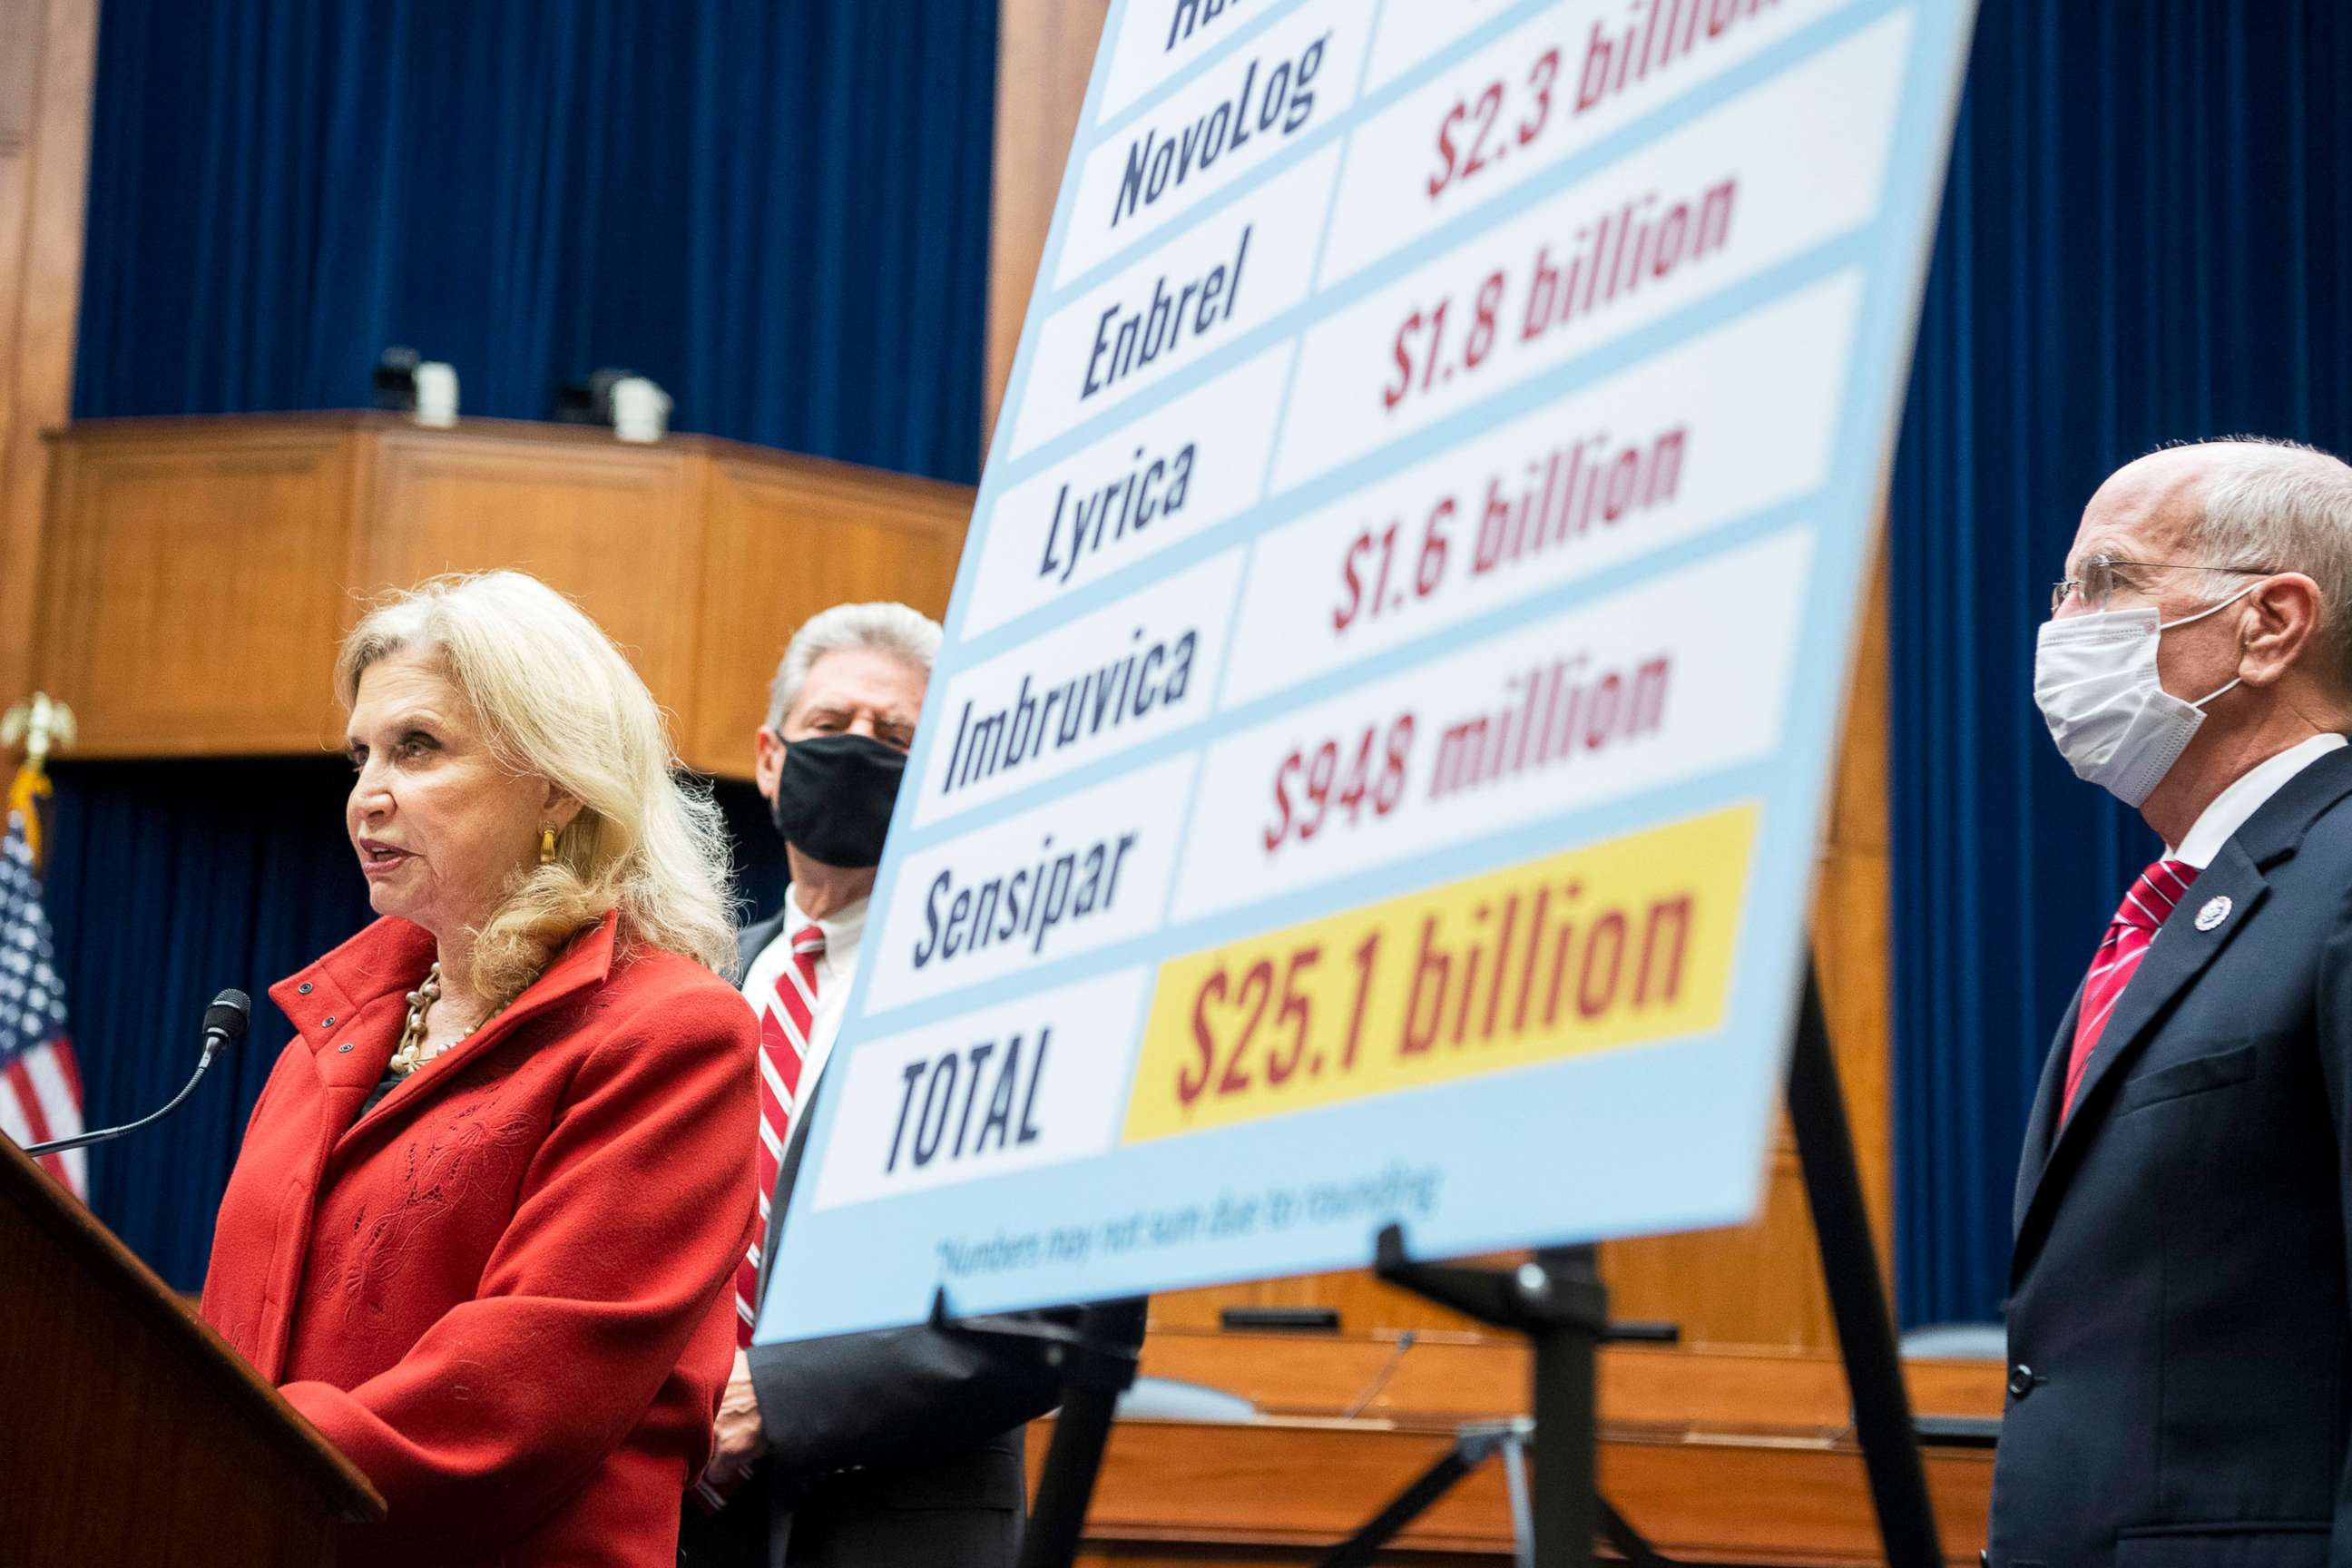 PHOTO: Rep. Carolyn Maloney, Rep. Frank Pallone, and Rep. Peter Welch, conduct a news conference money taxpayers could have saved if Medicare was allowed to directly negotiate the price of prescription drugs, in Washington, Sept. 23, 2021.